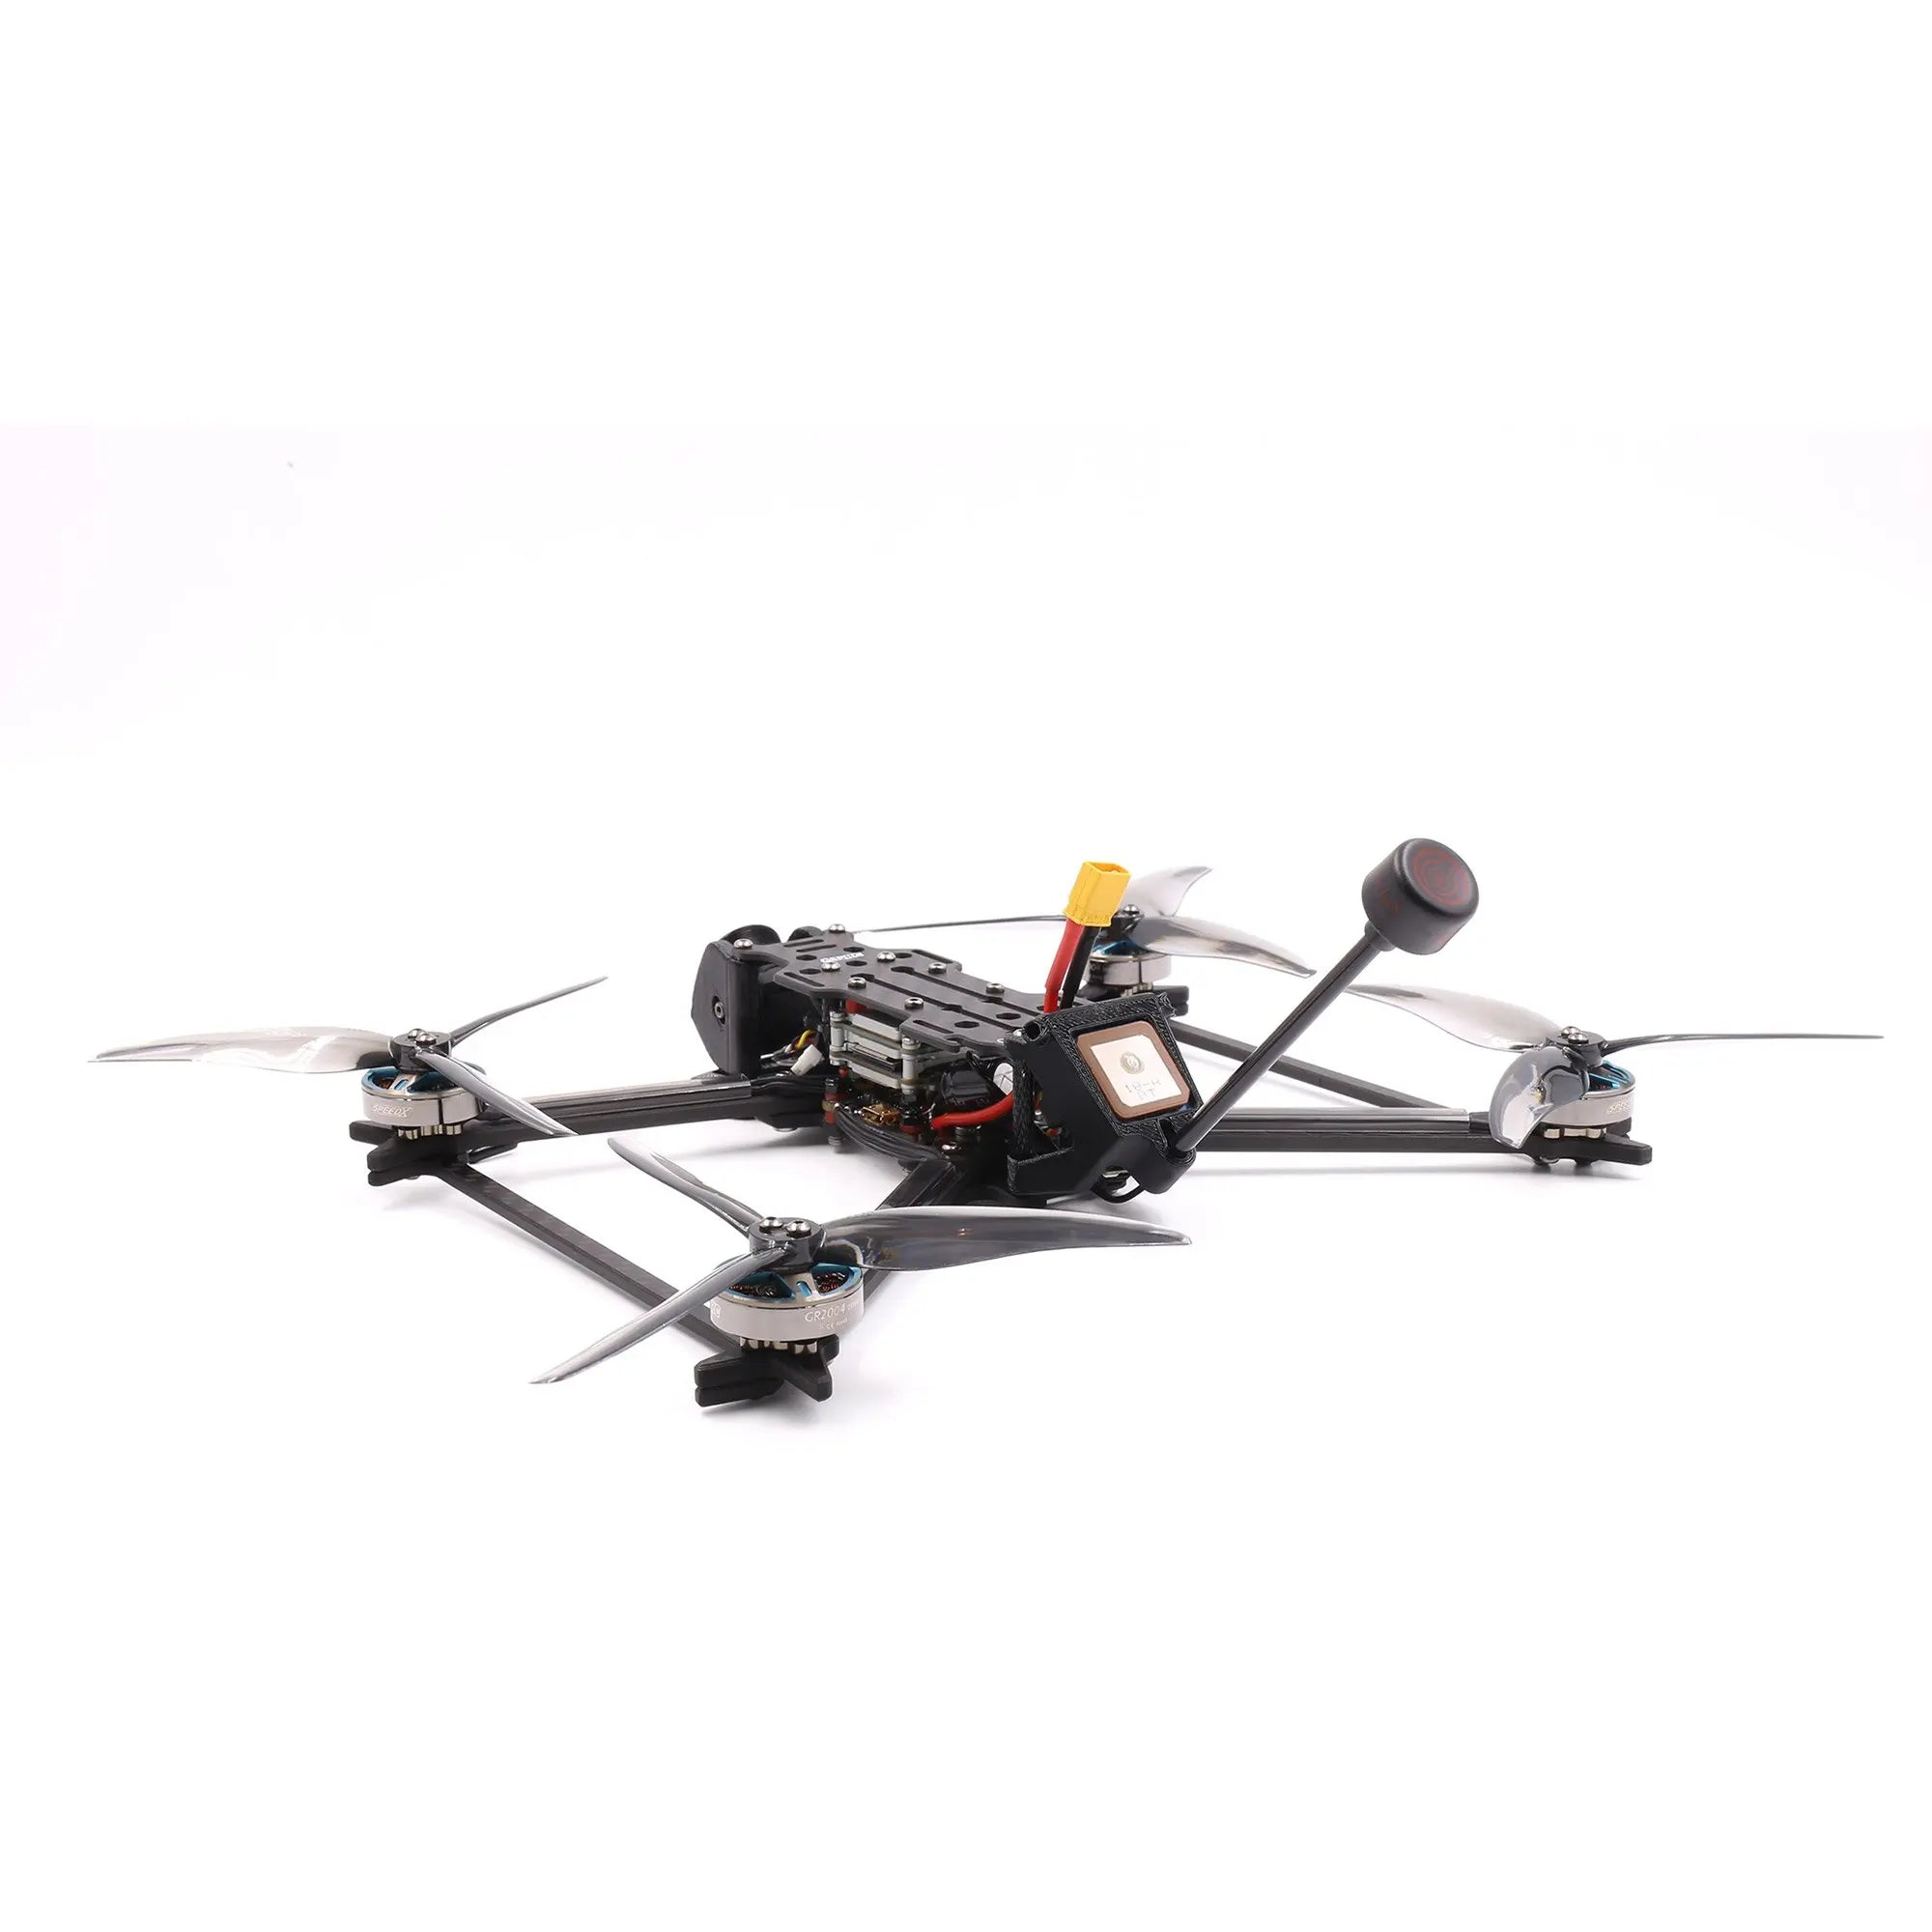 GEPRC Crocodile5 Baby FPV Drone, Powering On: Insert a fully charged battery into the drone and power it on